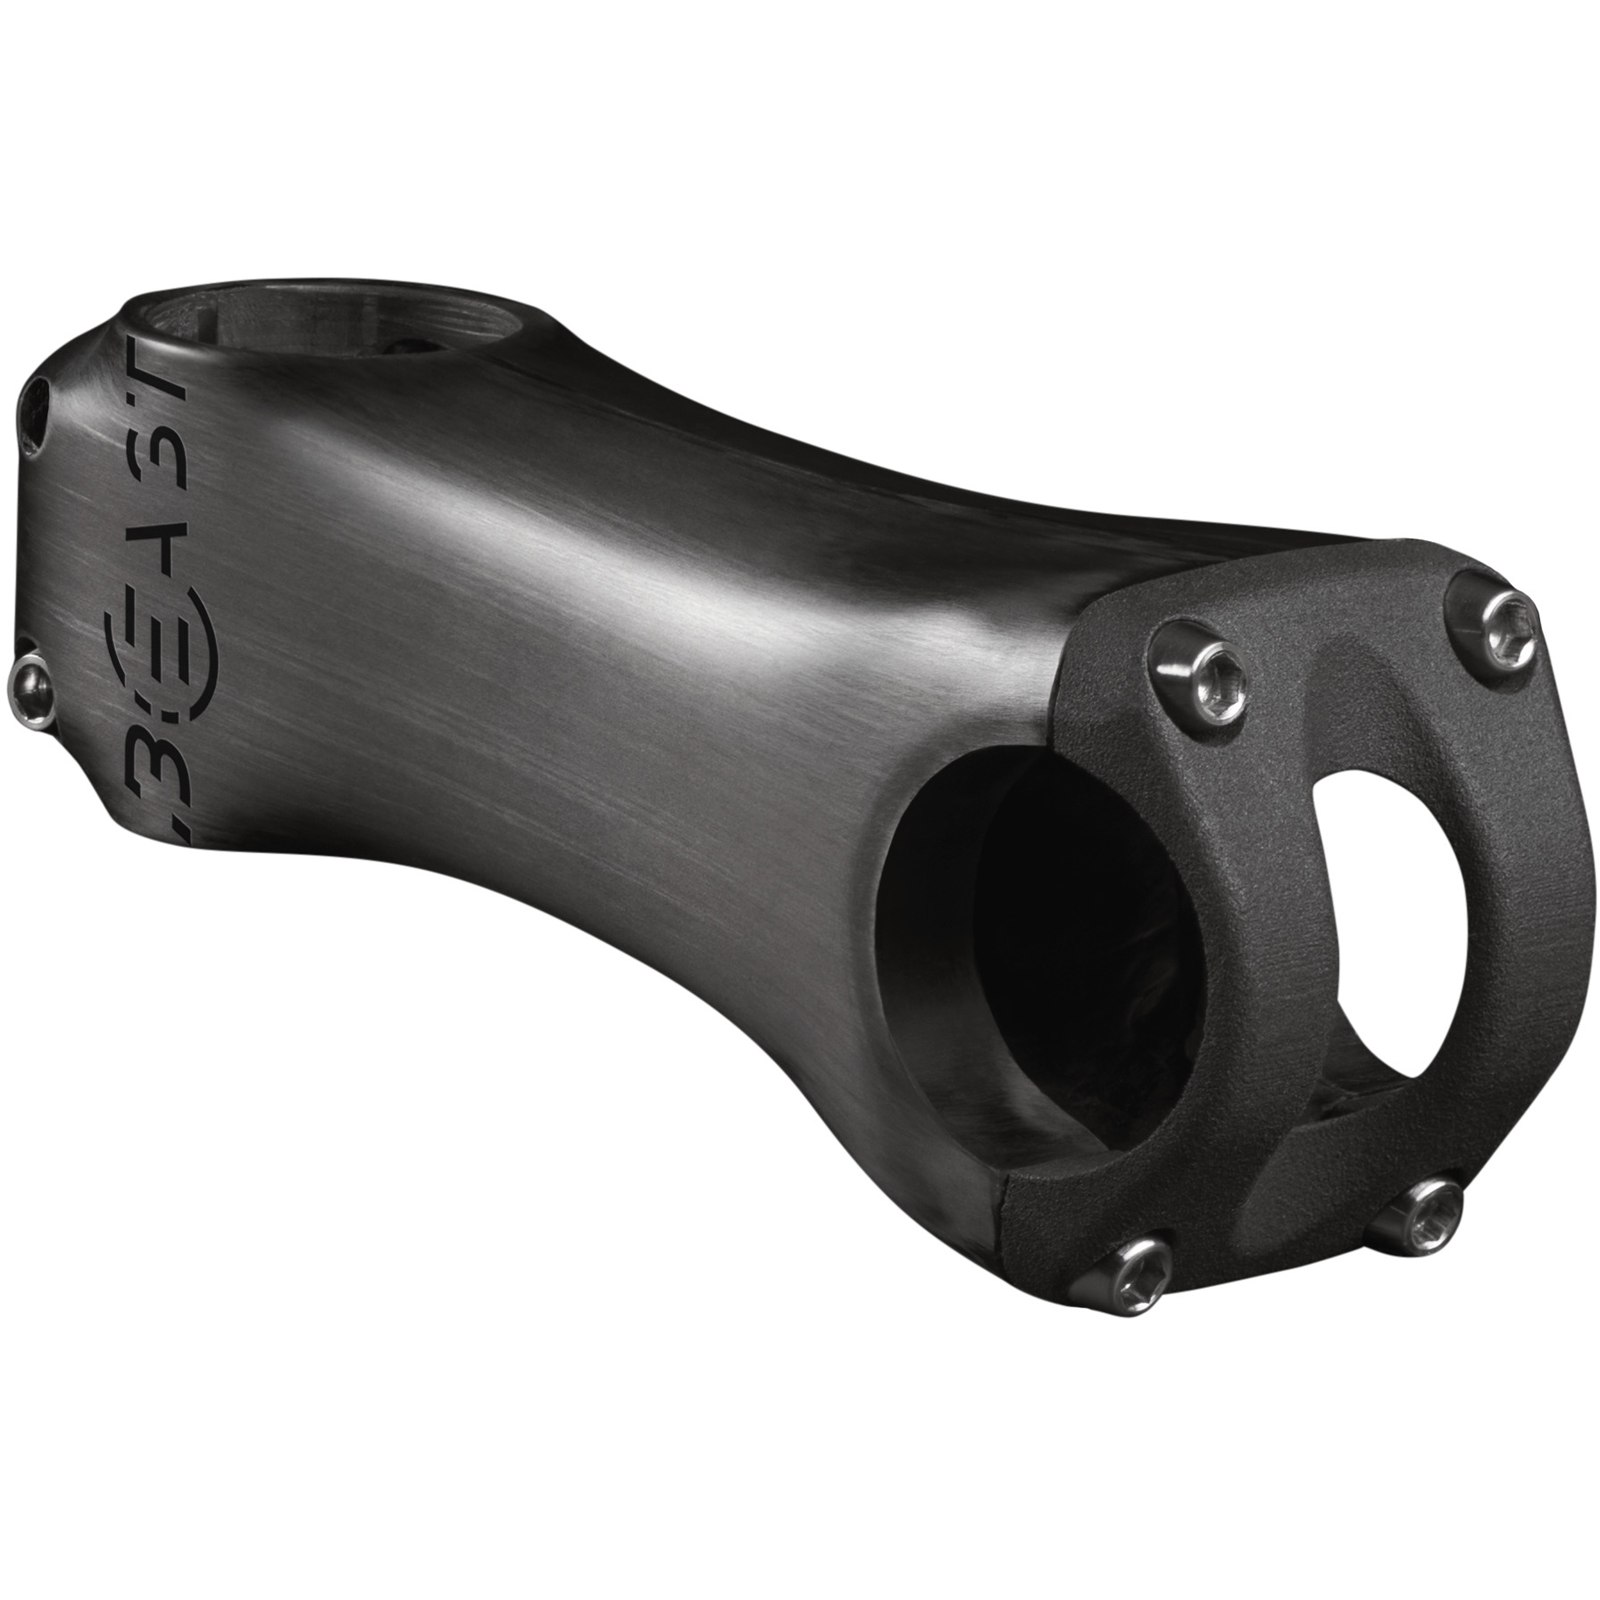 Picture of Beast Components Road Carbon Stem 31.8mm - 6° - UD black